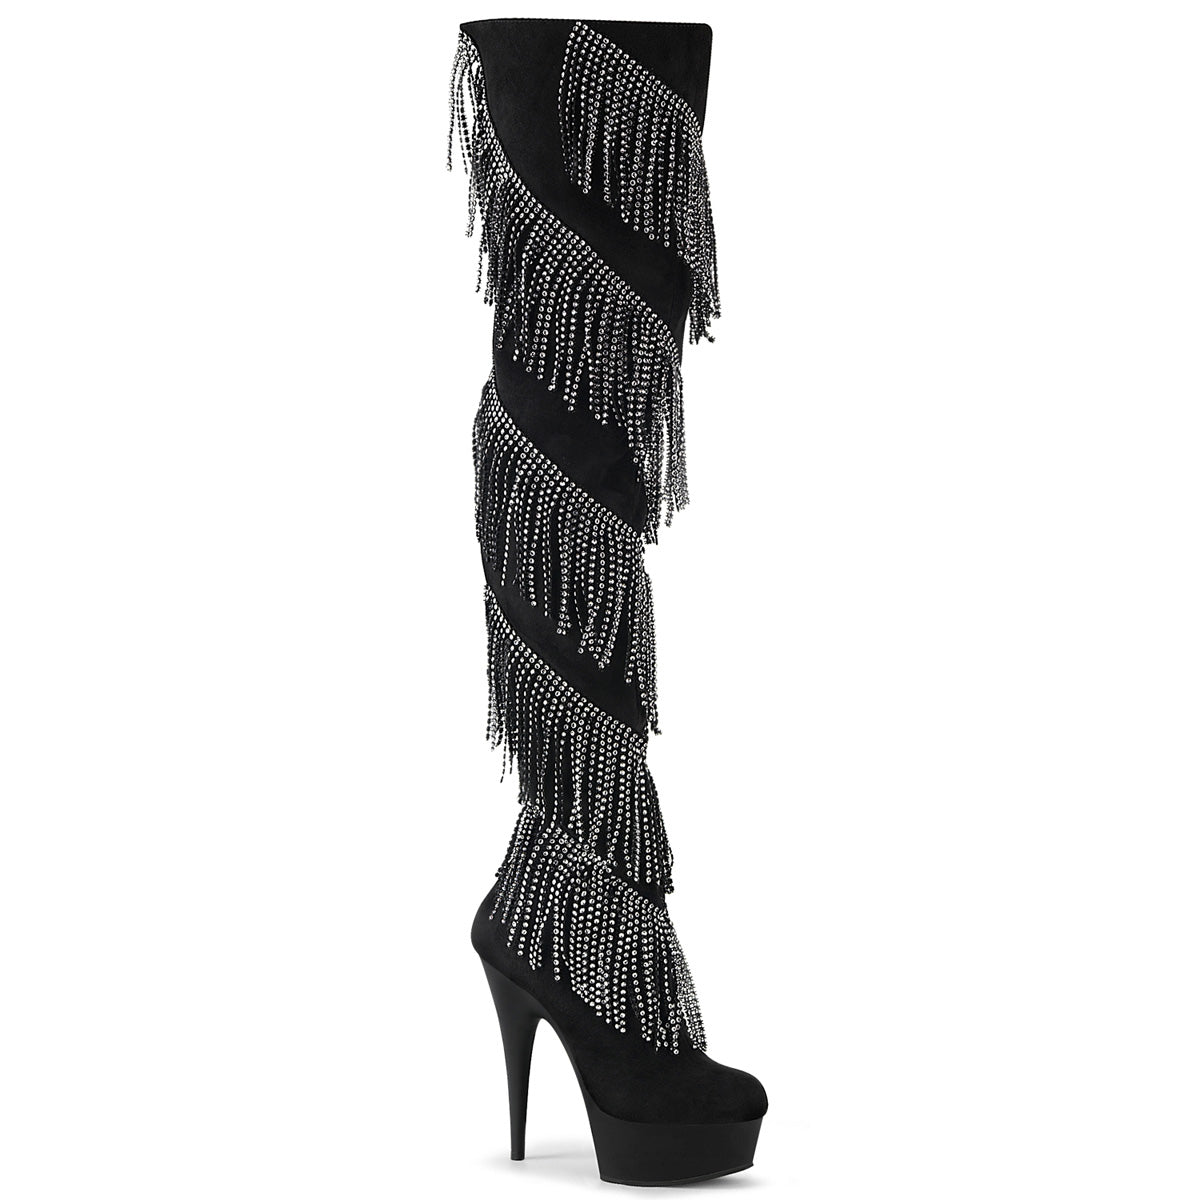 6 inch thigh high Boots with Fringe Detail